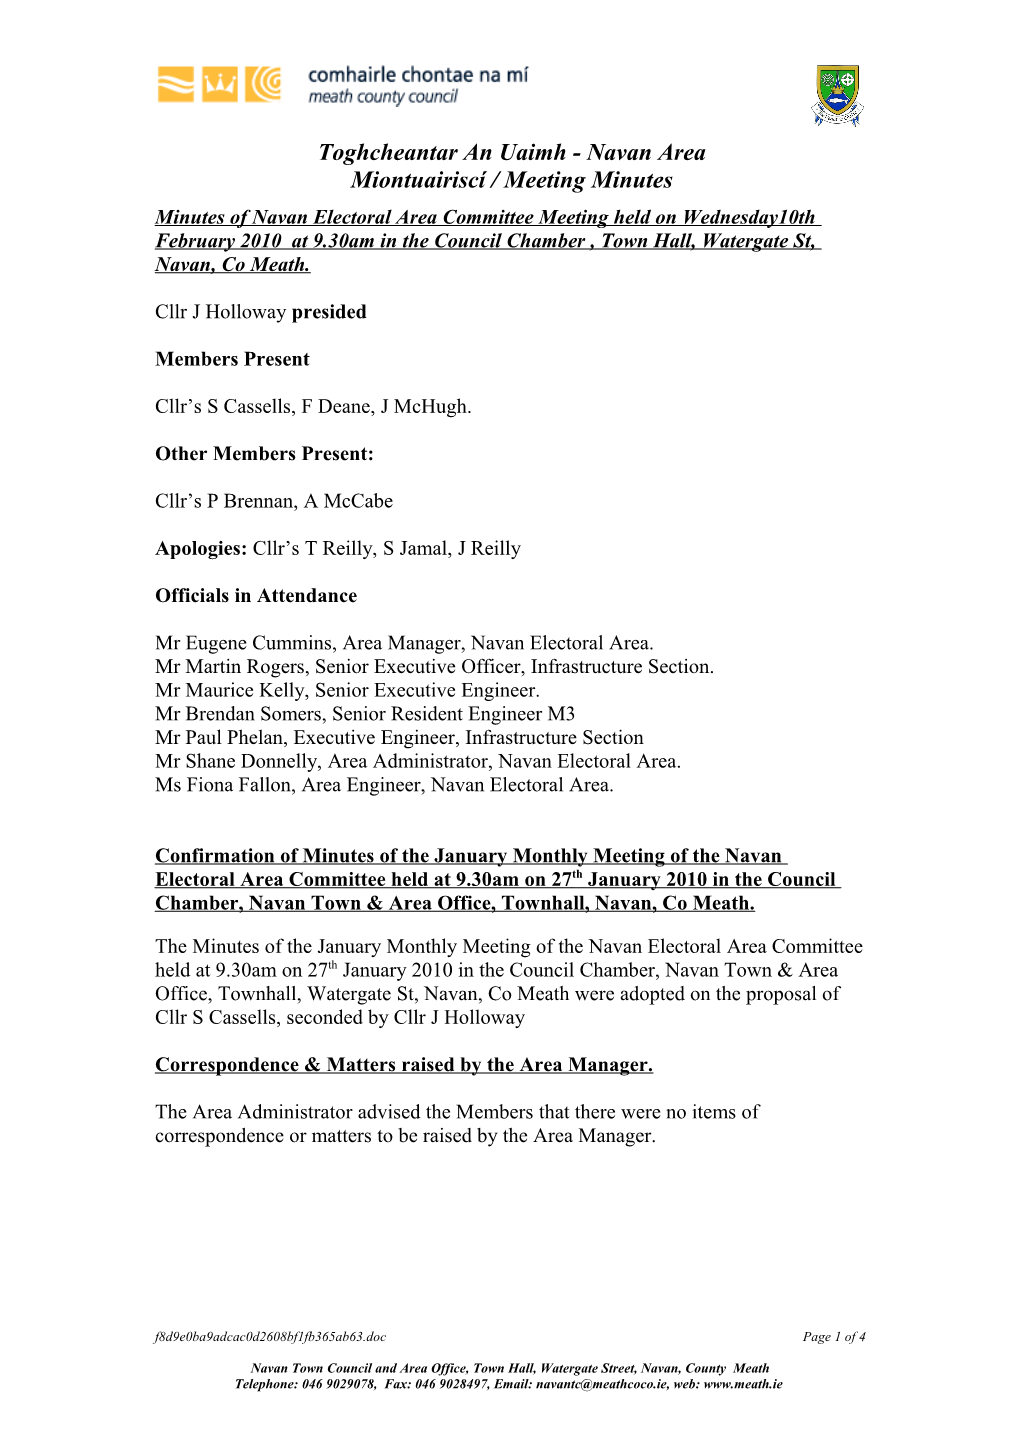 Minutes of Navan Electoral Area Committee Meeting Held on Wednesday10th February 2010 at 9